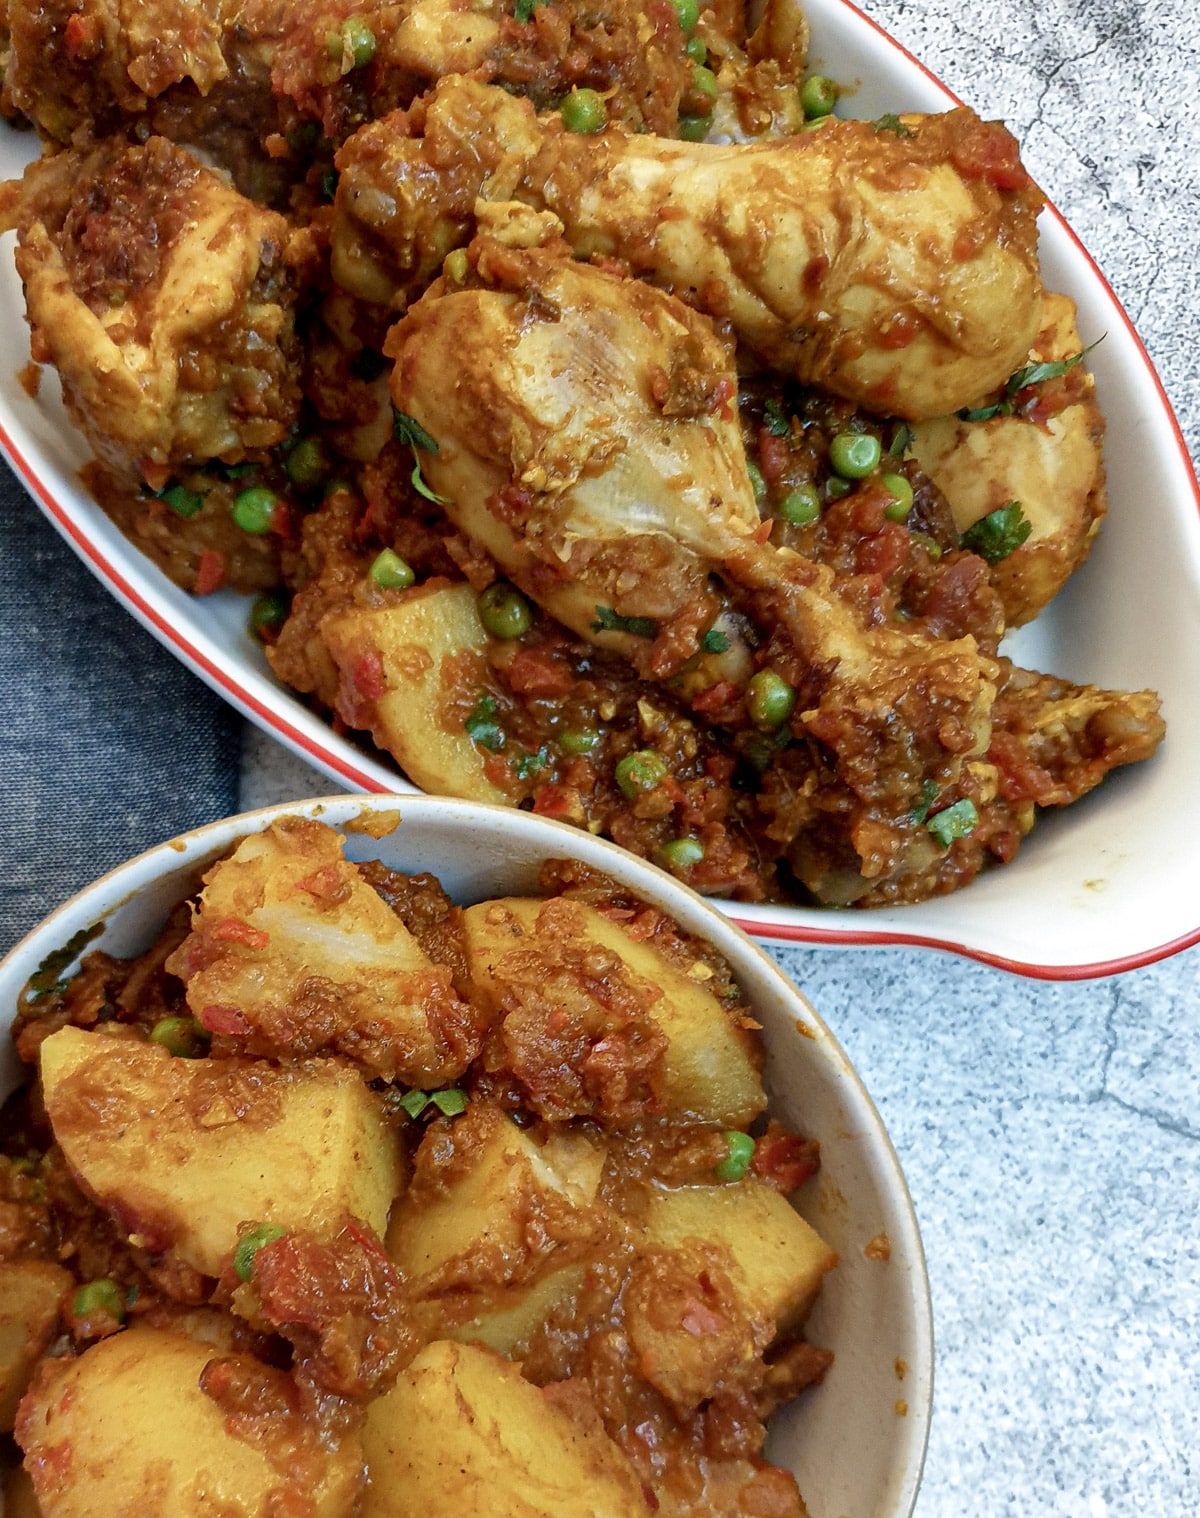 A dish of chicken bhuna made with chicken drumsticks, next to a side dish of Bombay potatoes.